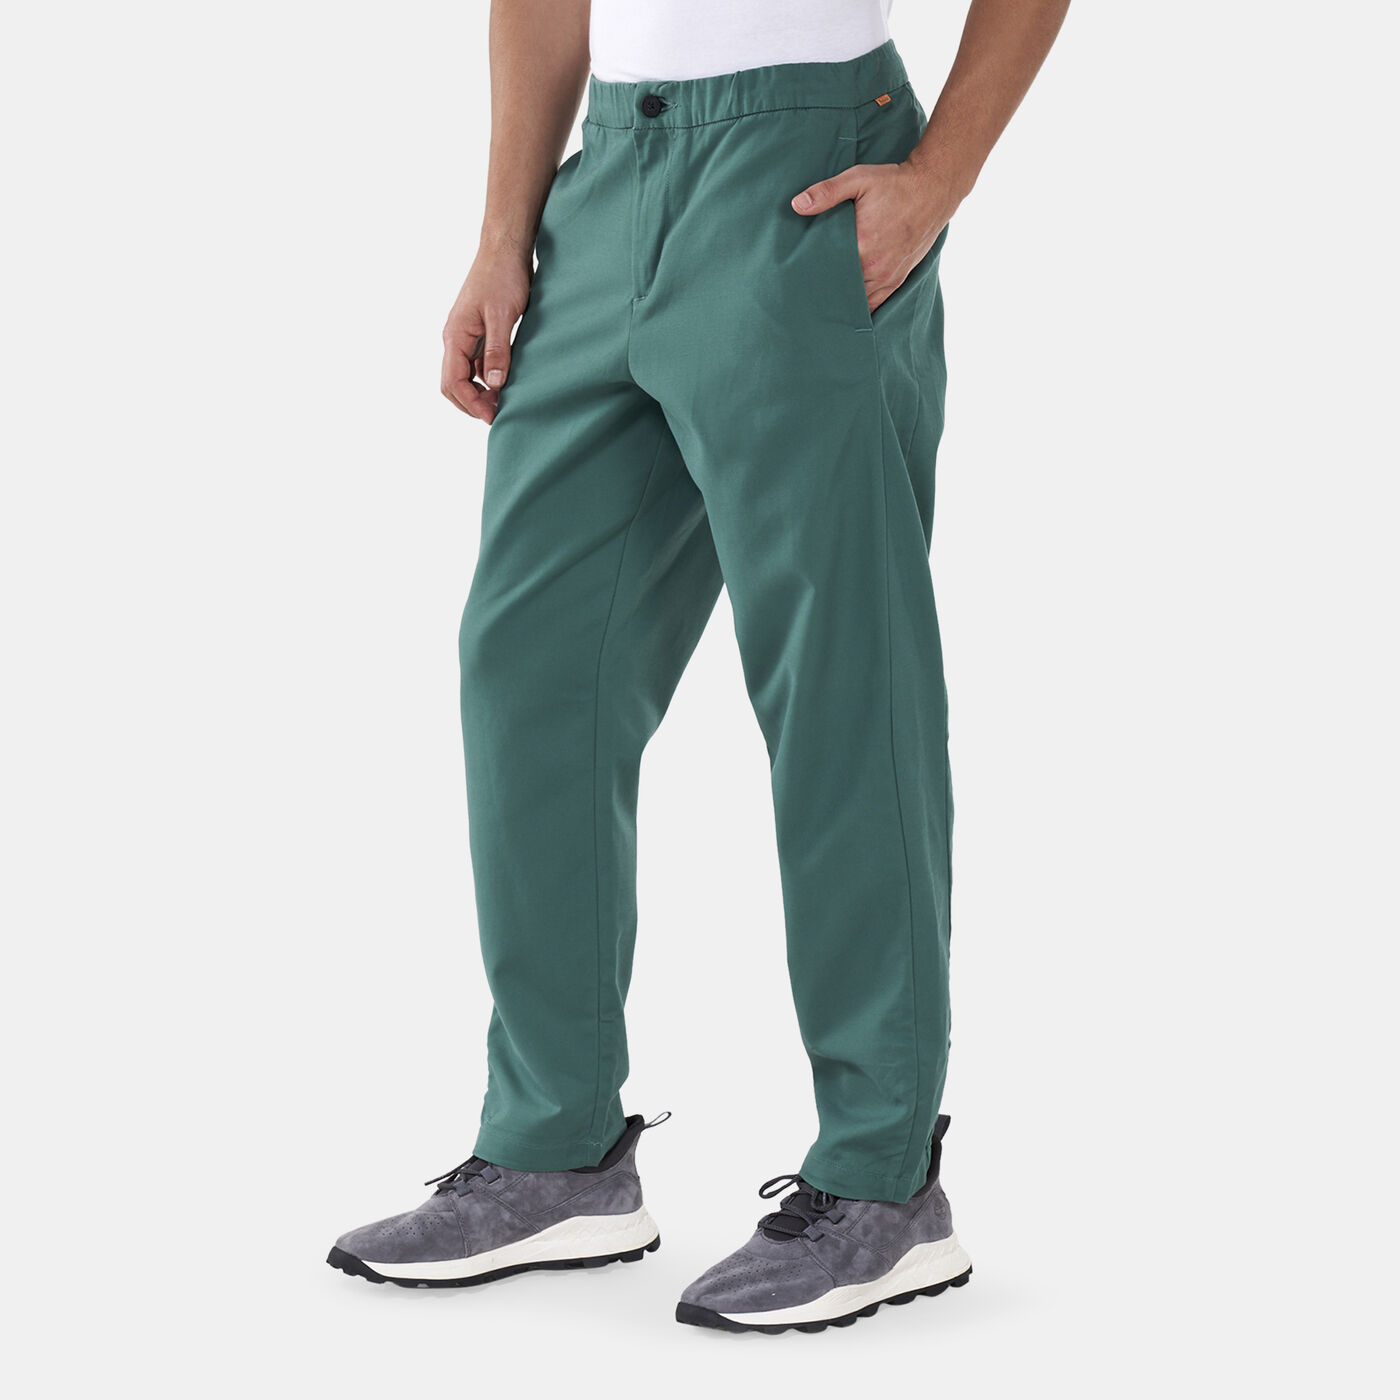 Men's Re-Comfort Refibra Ankle Length Wide Tapered Pants